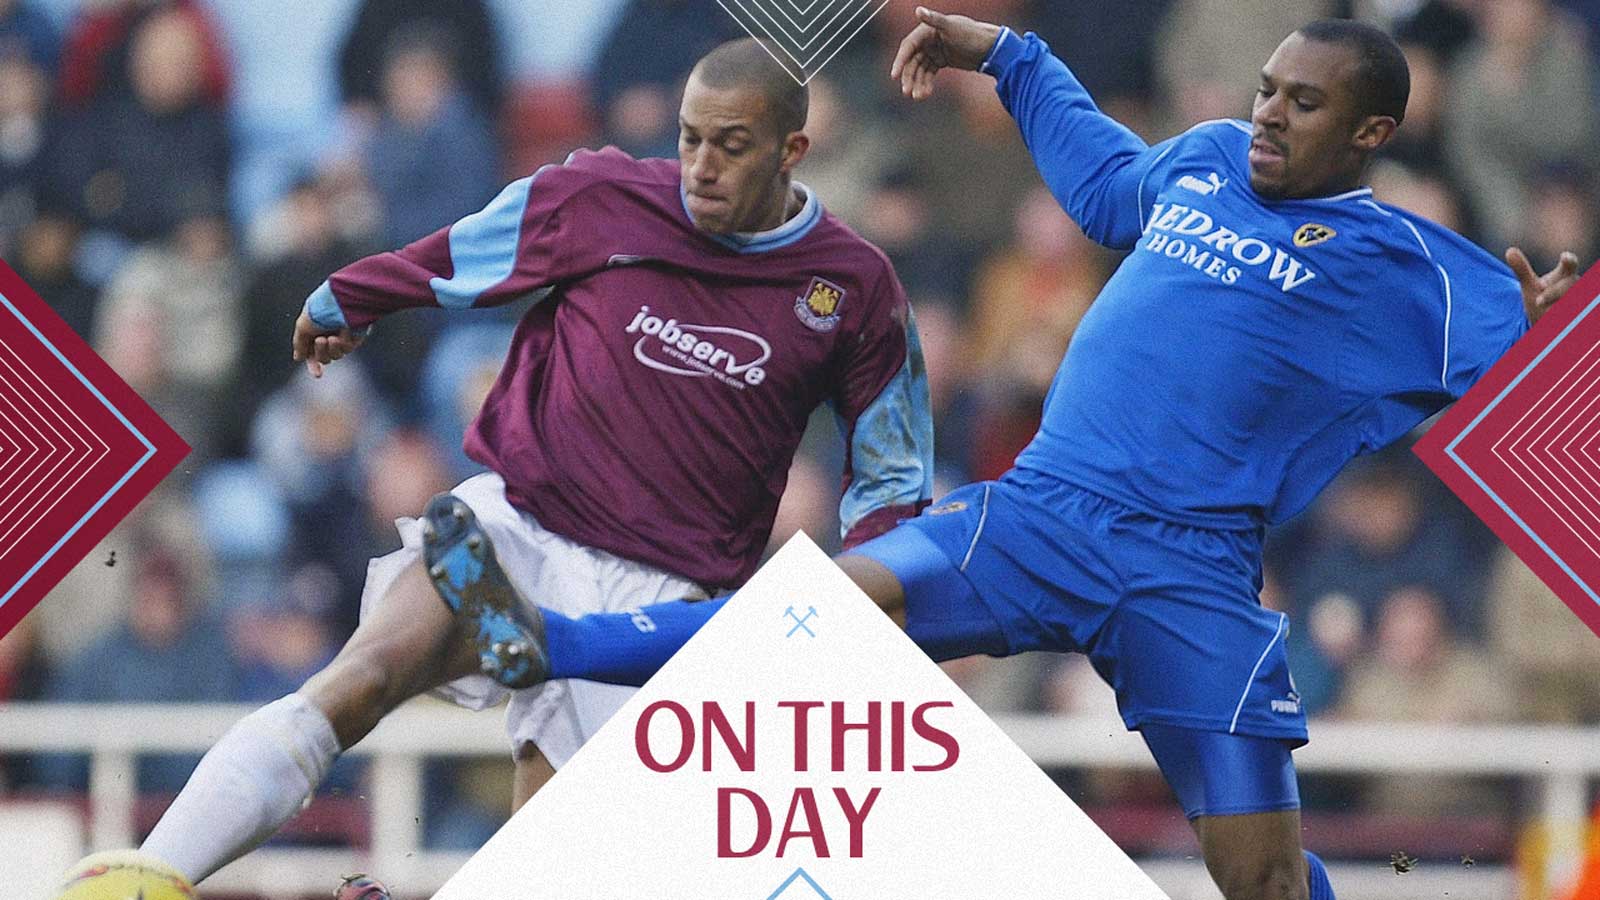 Bobby Zamora in action for West Ham United against Cardiff City in February 2004